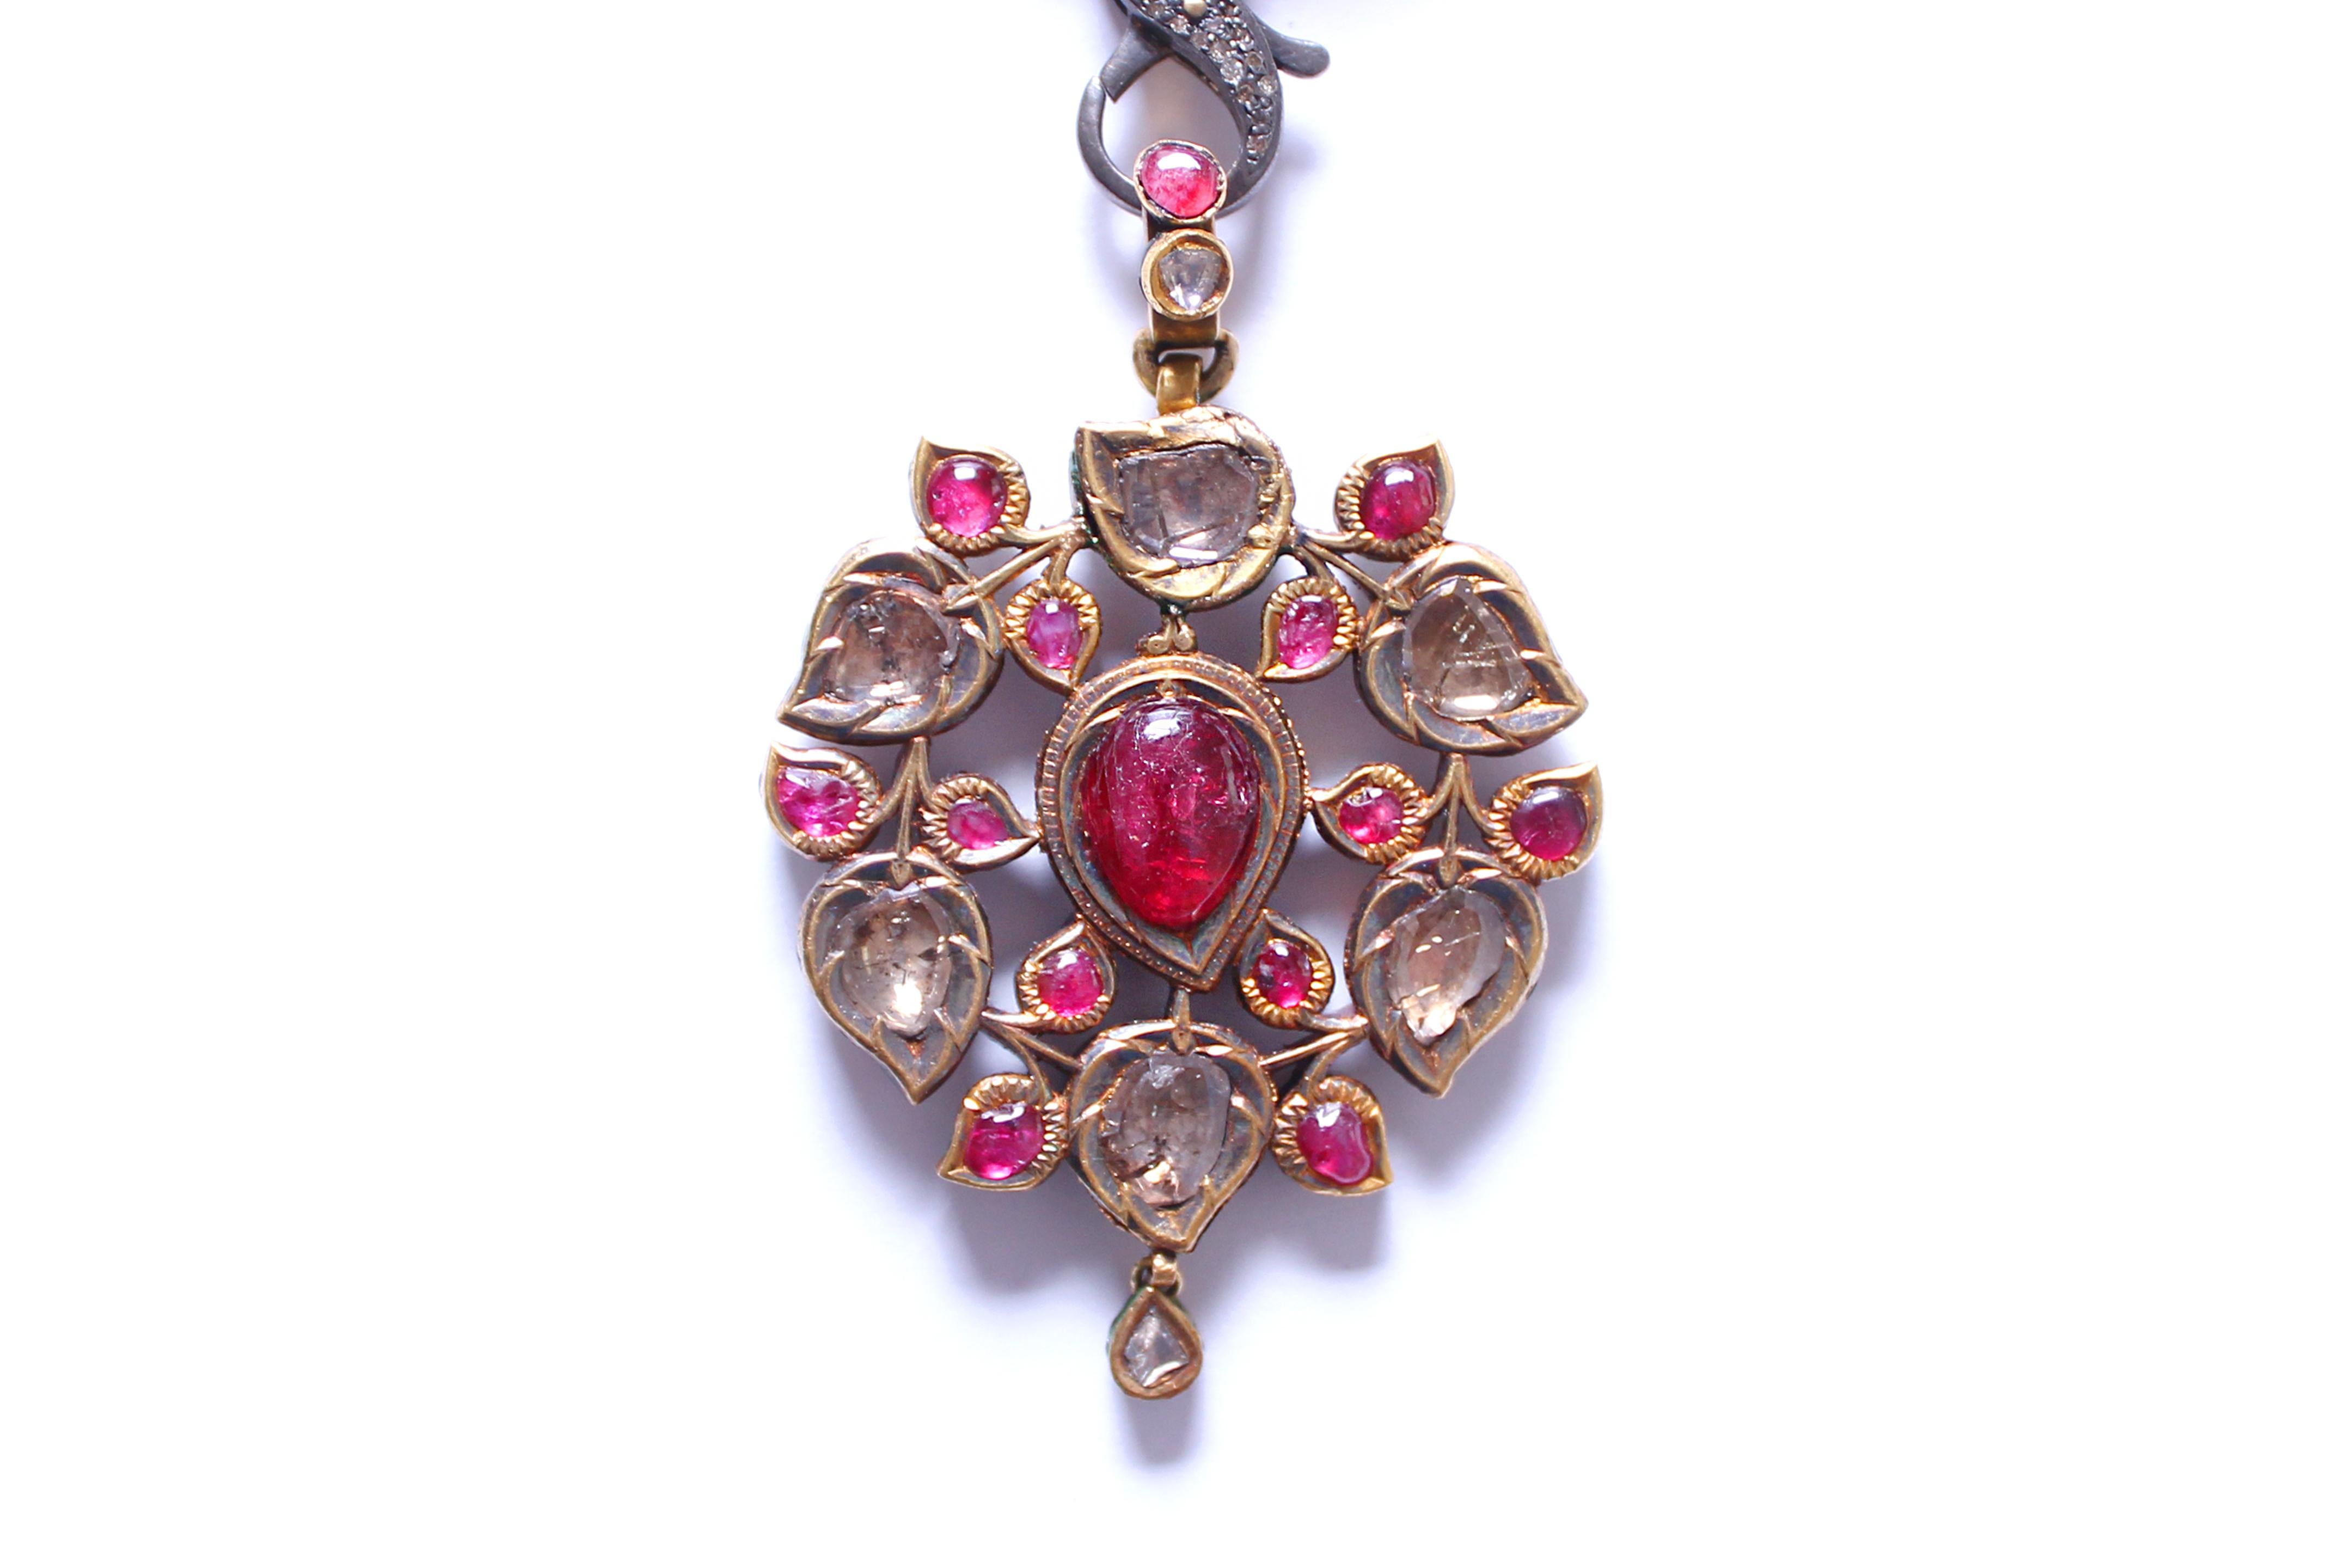 Mixed Cut Clarissa Bronfman Pink Ruby Diamond Crystal Ruby Indian Vintage Pendant Necklace For Sale